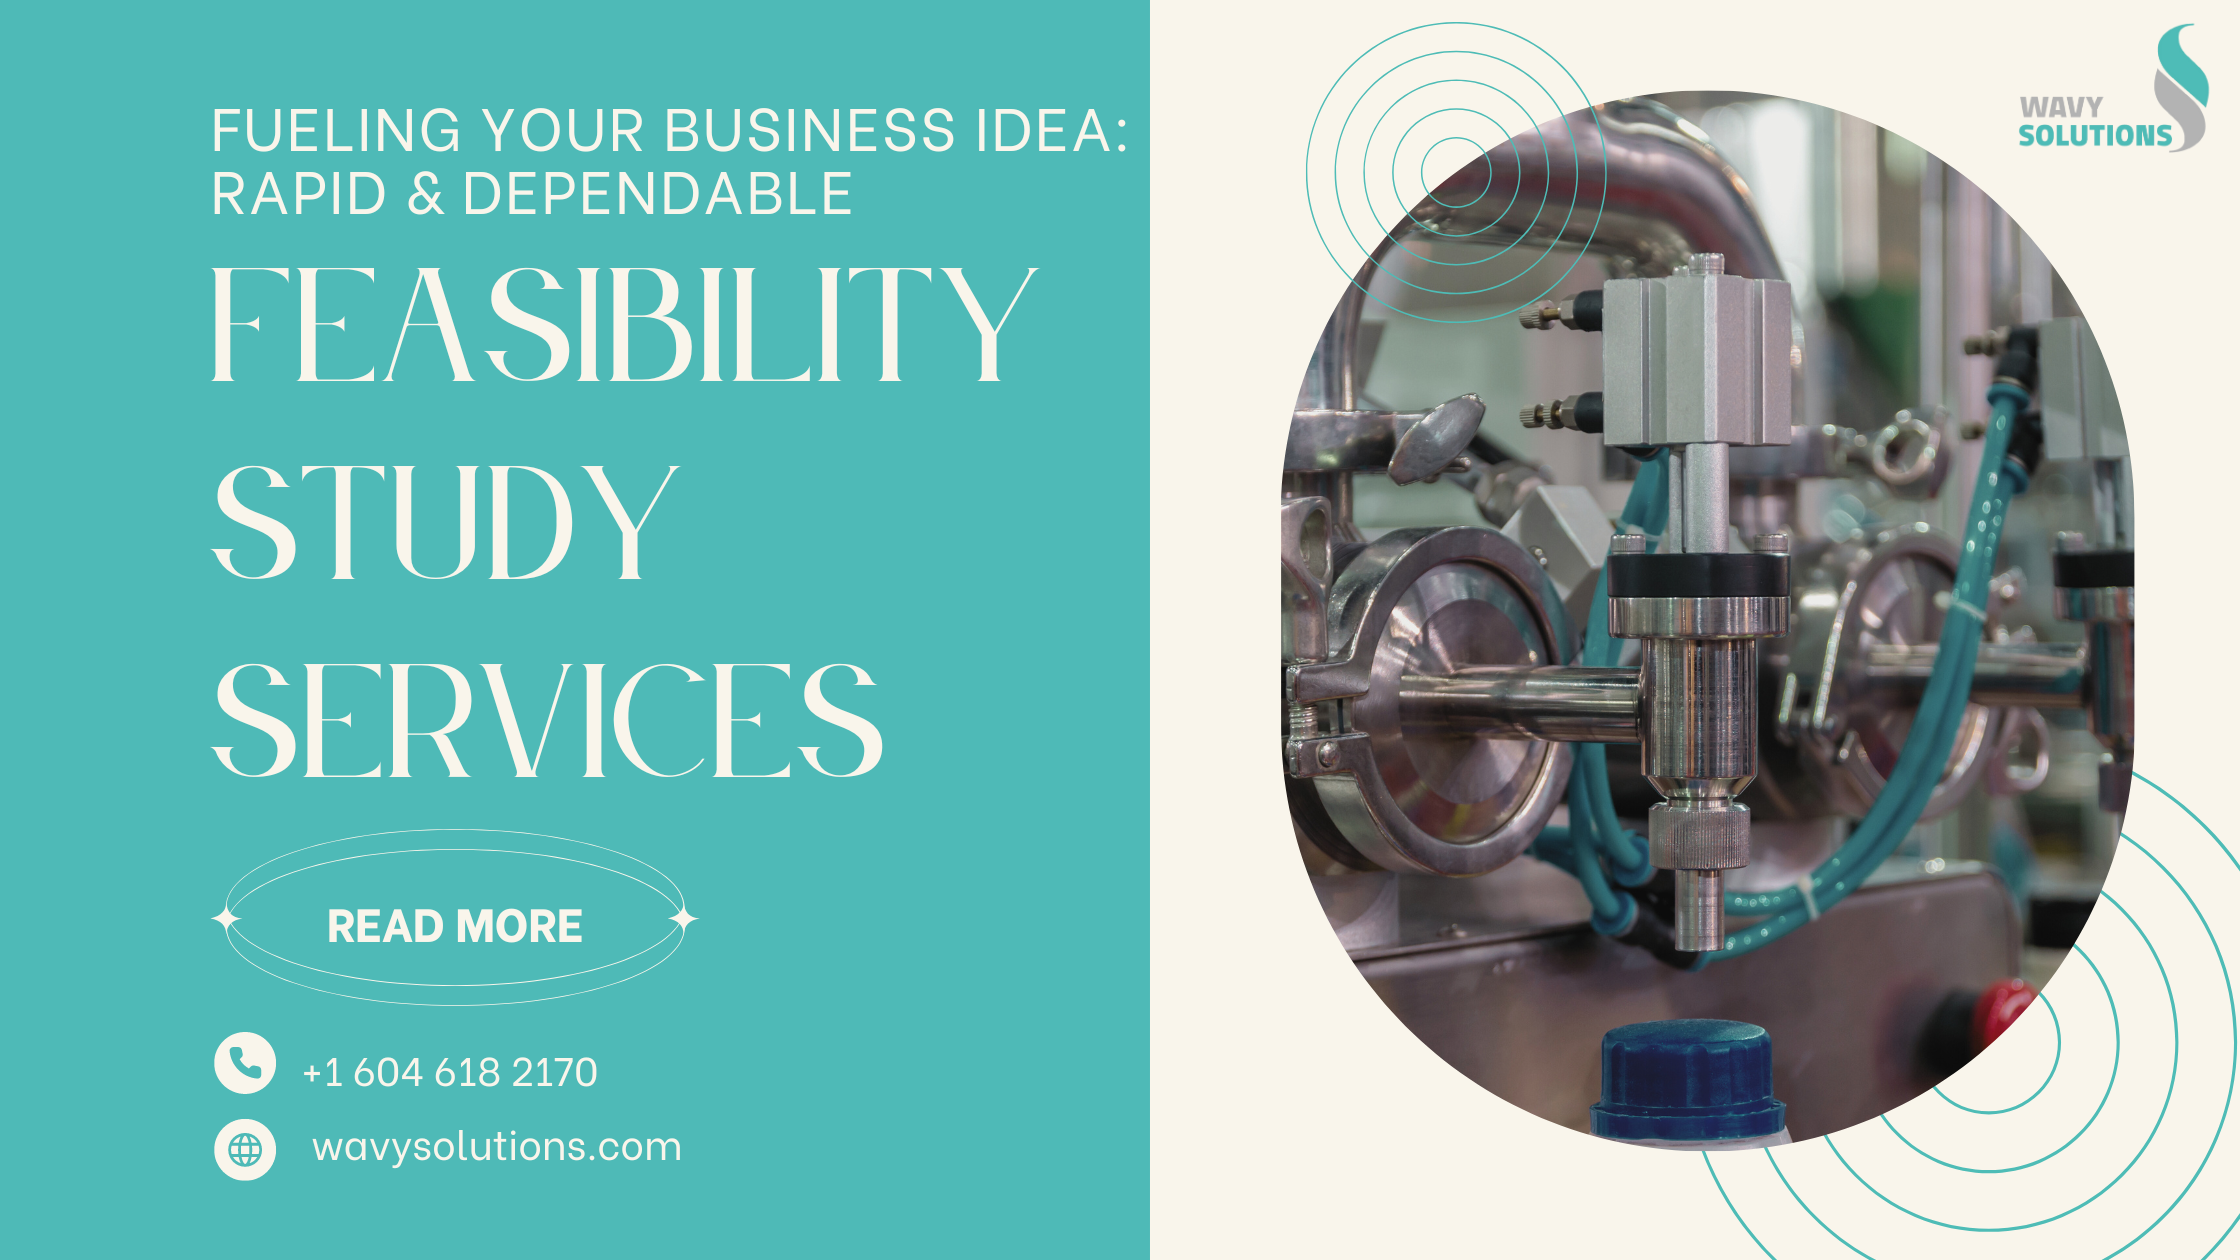 Fueling Your Business Idea: Rapid and Dependable Feasibility Study Services